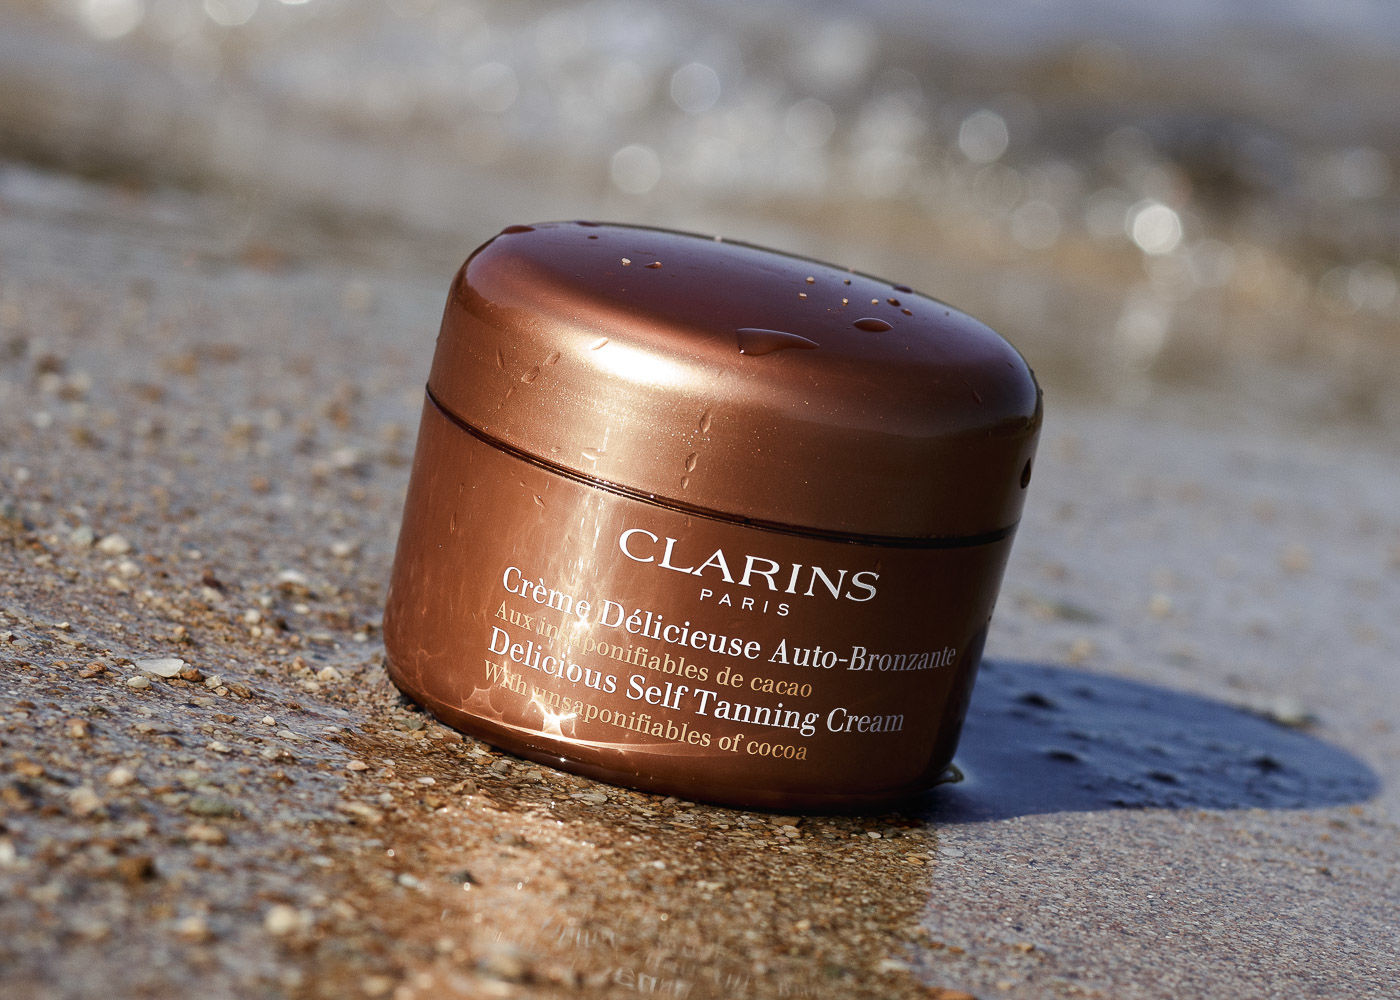 clarins delicious self taning cream review